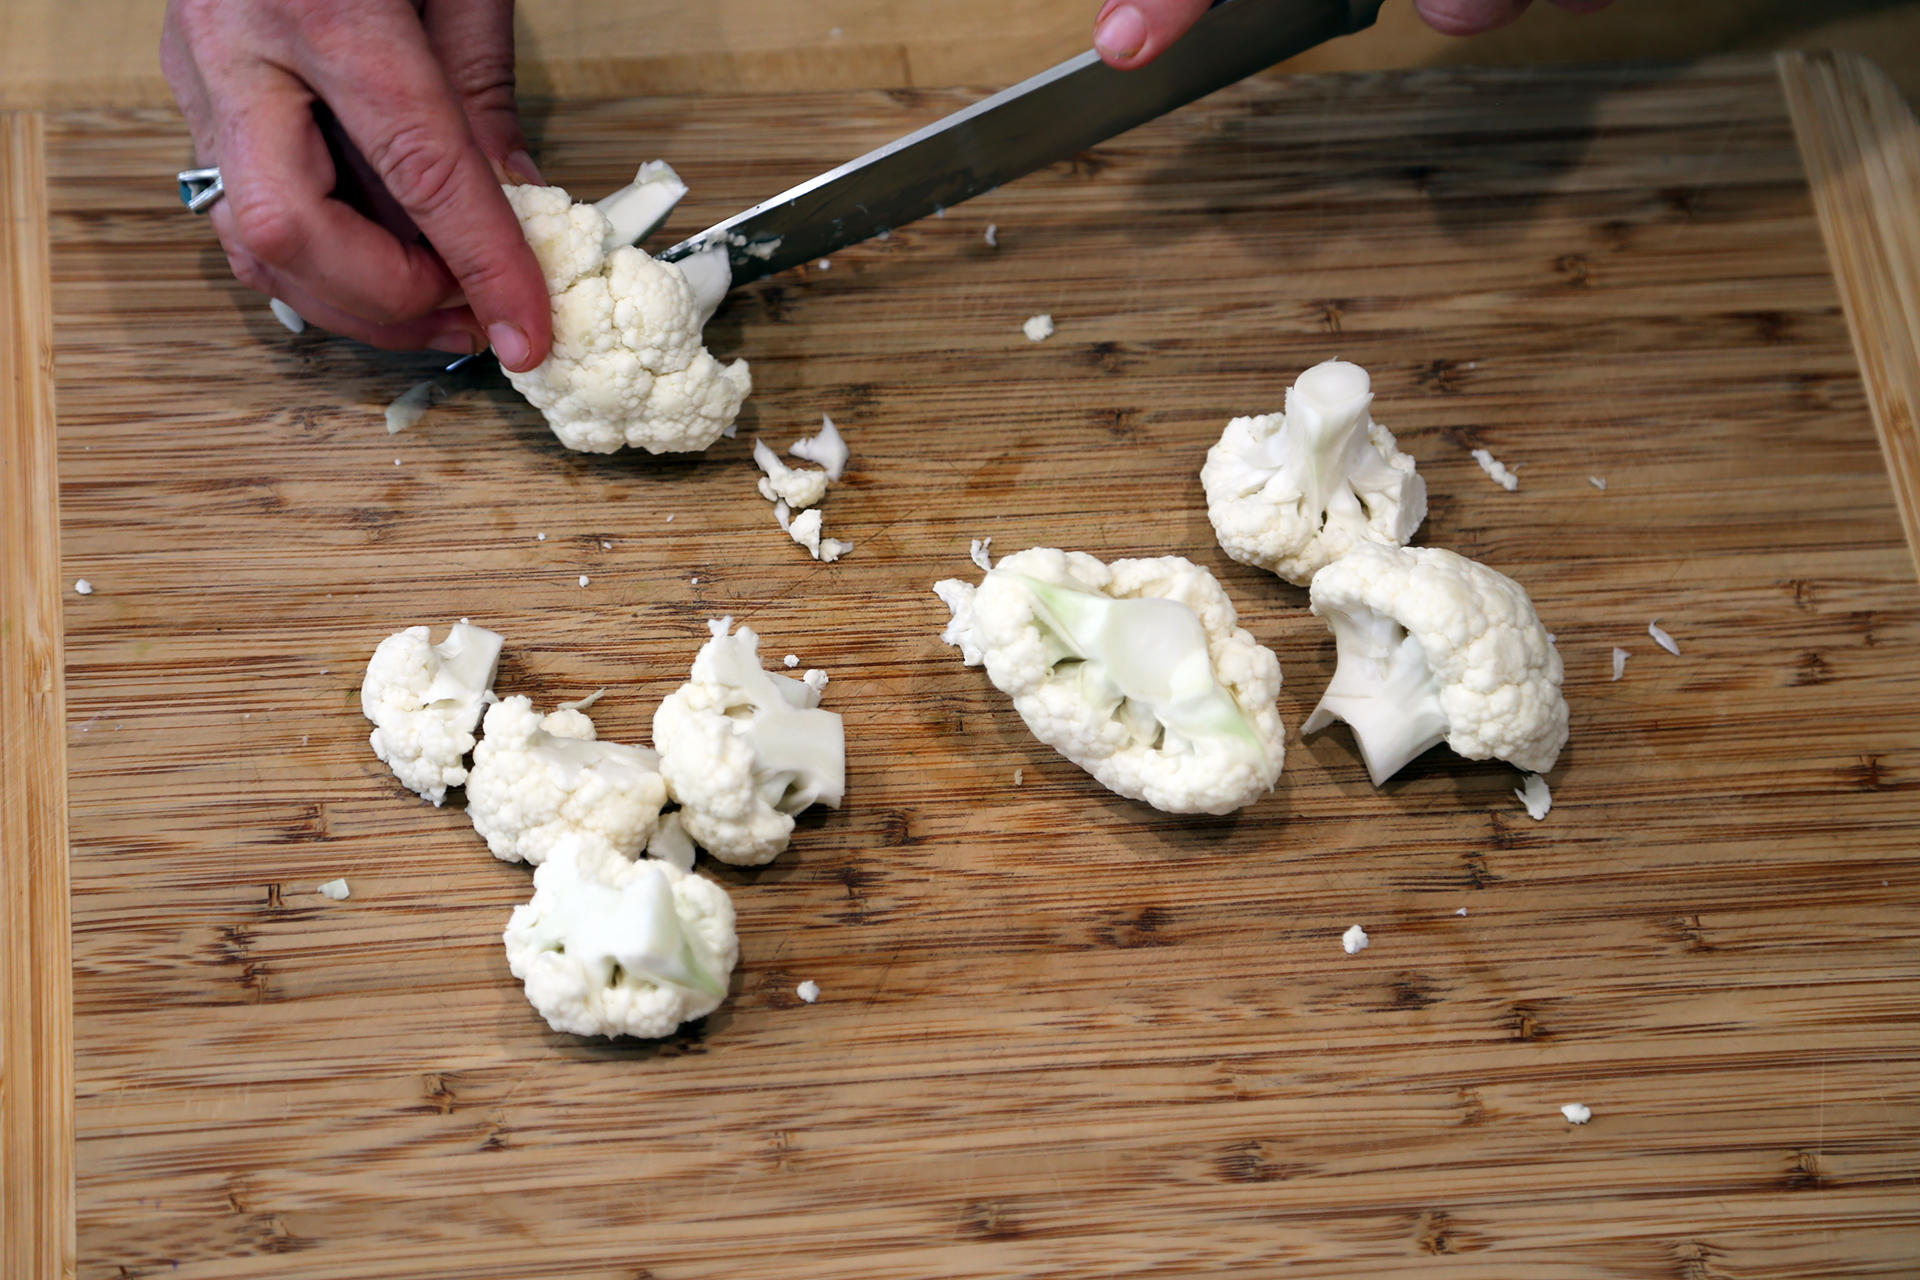 Cut the cauliflower into 1 to 2-inch florets.